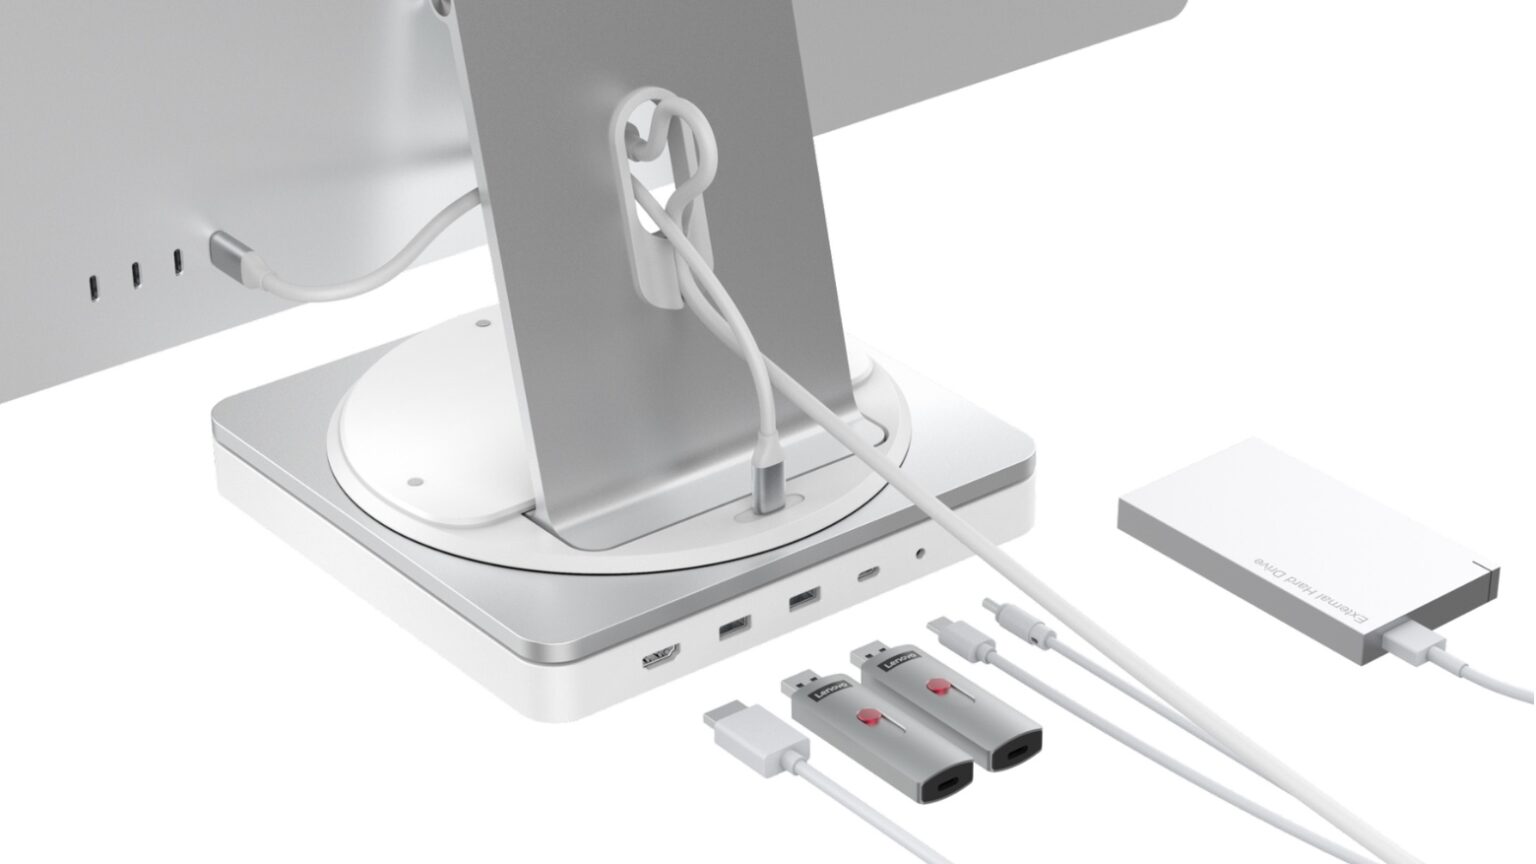 HyperDrive Turntable Dock for iMac will have your head spinning